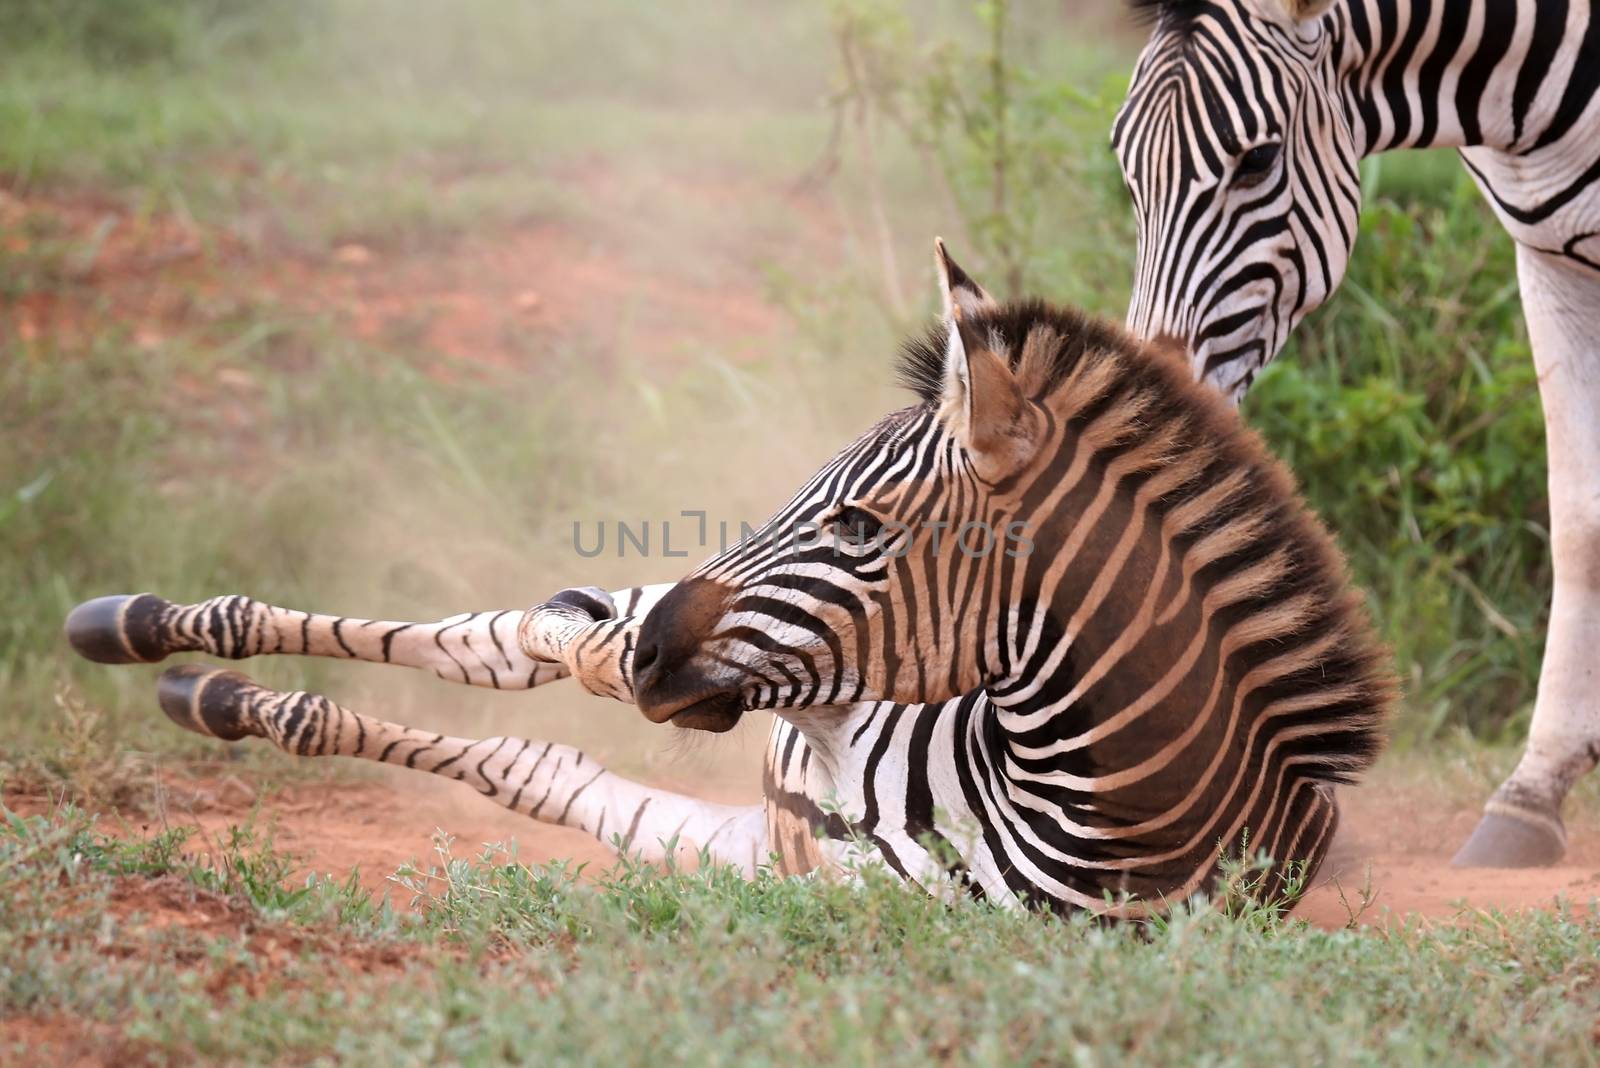 Young zebra having a dust bathe while it's mother watches